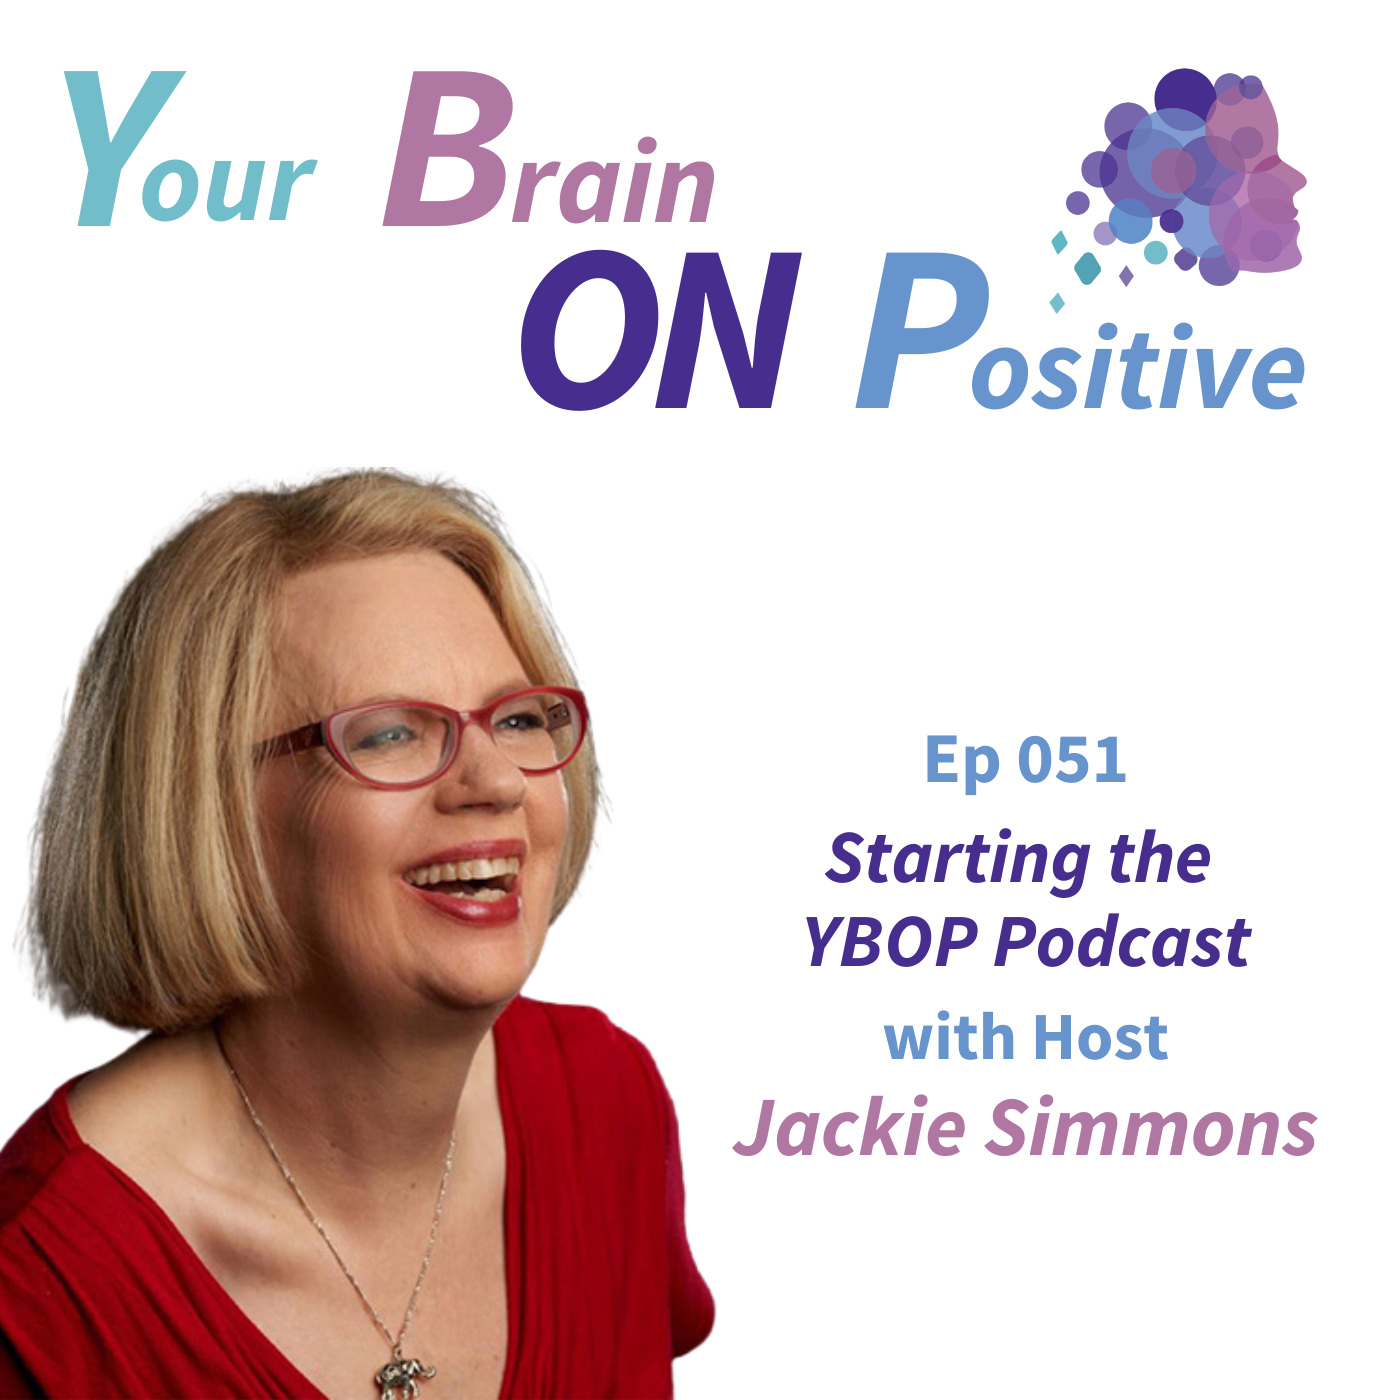 Starting the YBOP Podcast - Jackie Simmons